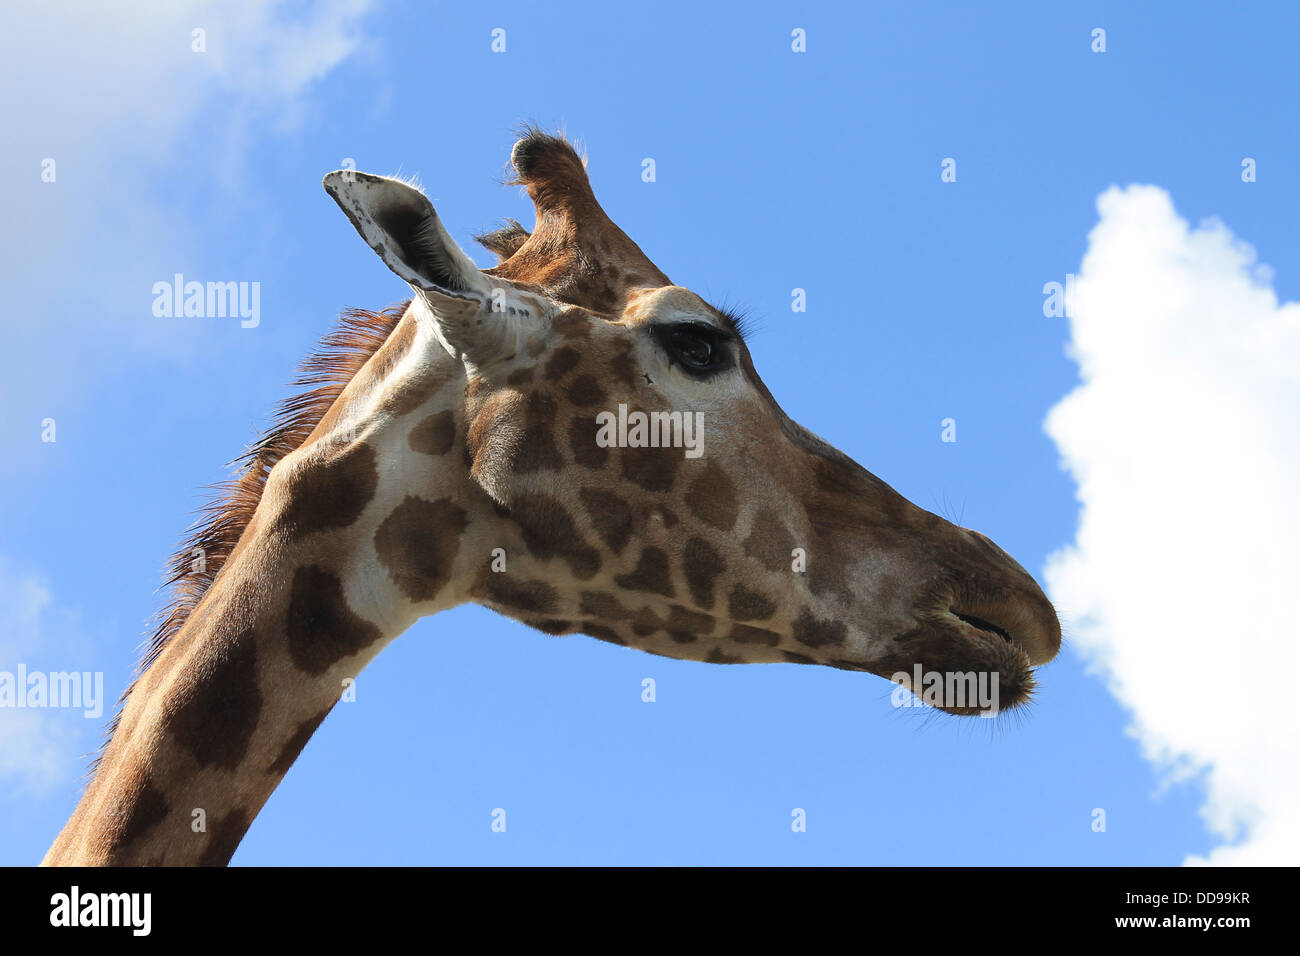 Giraffe, close-up of head and upper neck against a brilliant blue sky Stock Photo